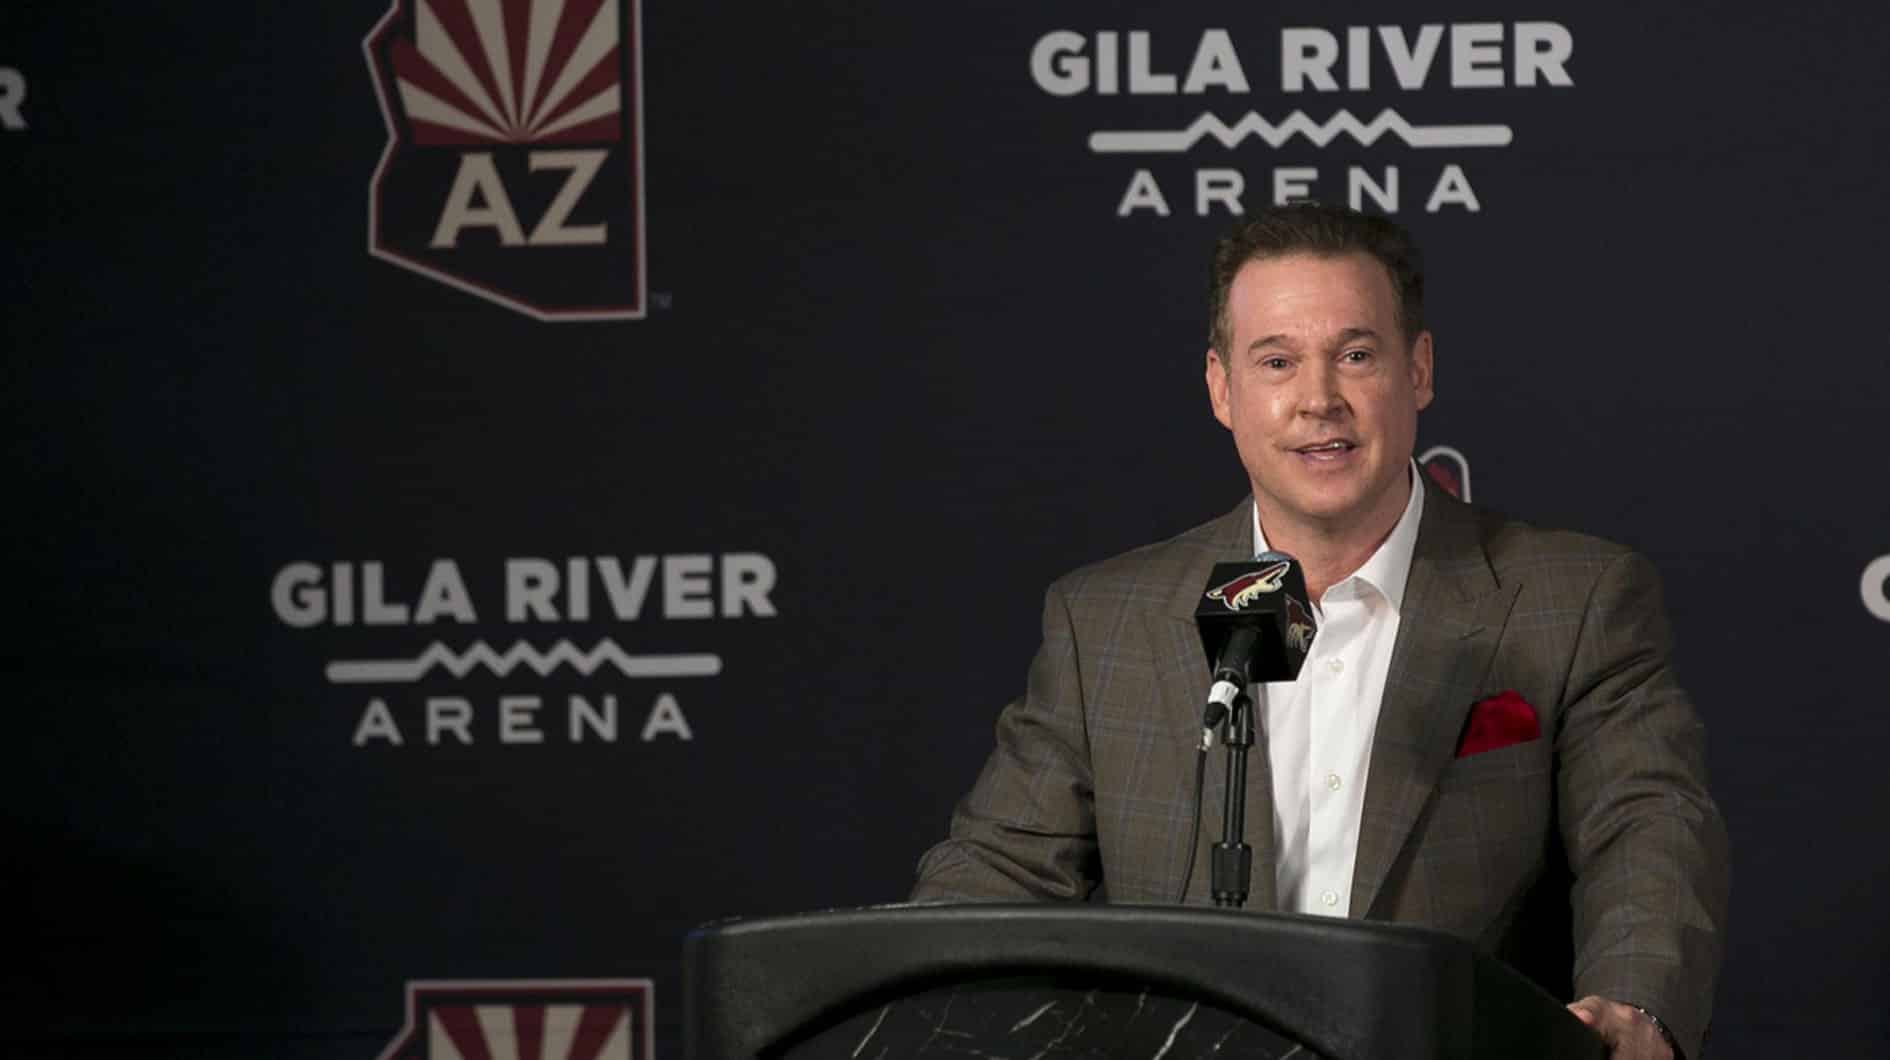 Coyotes owner Alex Meruelo speaks to the media at a news conference announcing his new ownership at Gila River Arena in Glendale on Thursday. Thomas Hawthorne/The Republic Coyotes owner Alex Meruelo speaks to the media at a press conference announcing Meruelo's new ownership of the Coyotes at Gila River Arena in Glendale, Ariz. on July 31, 2019.